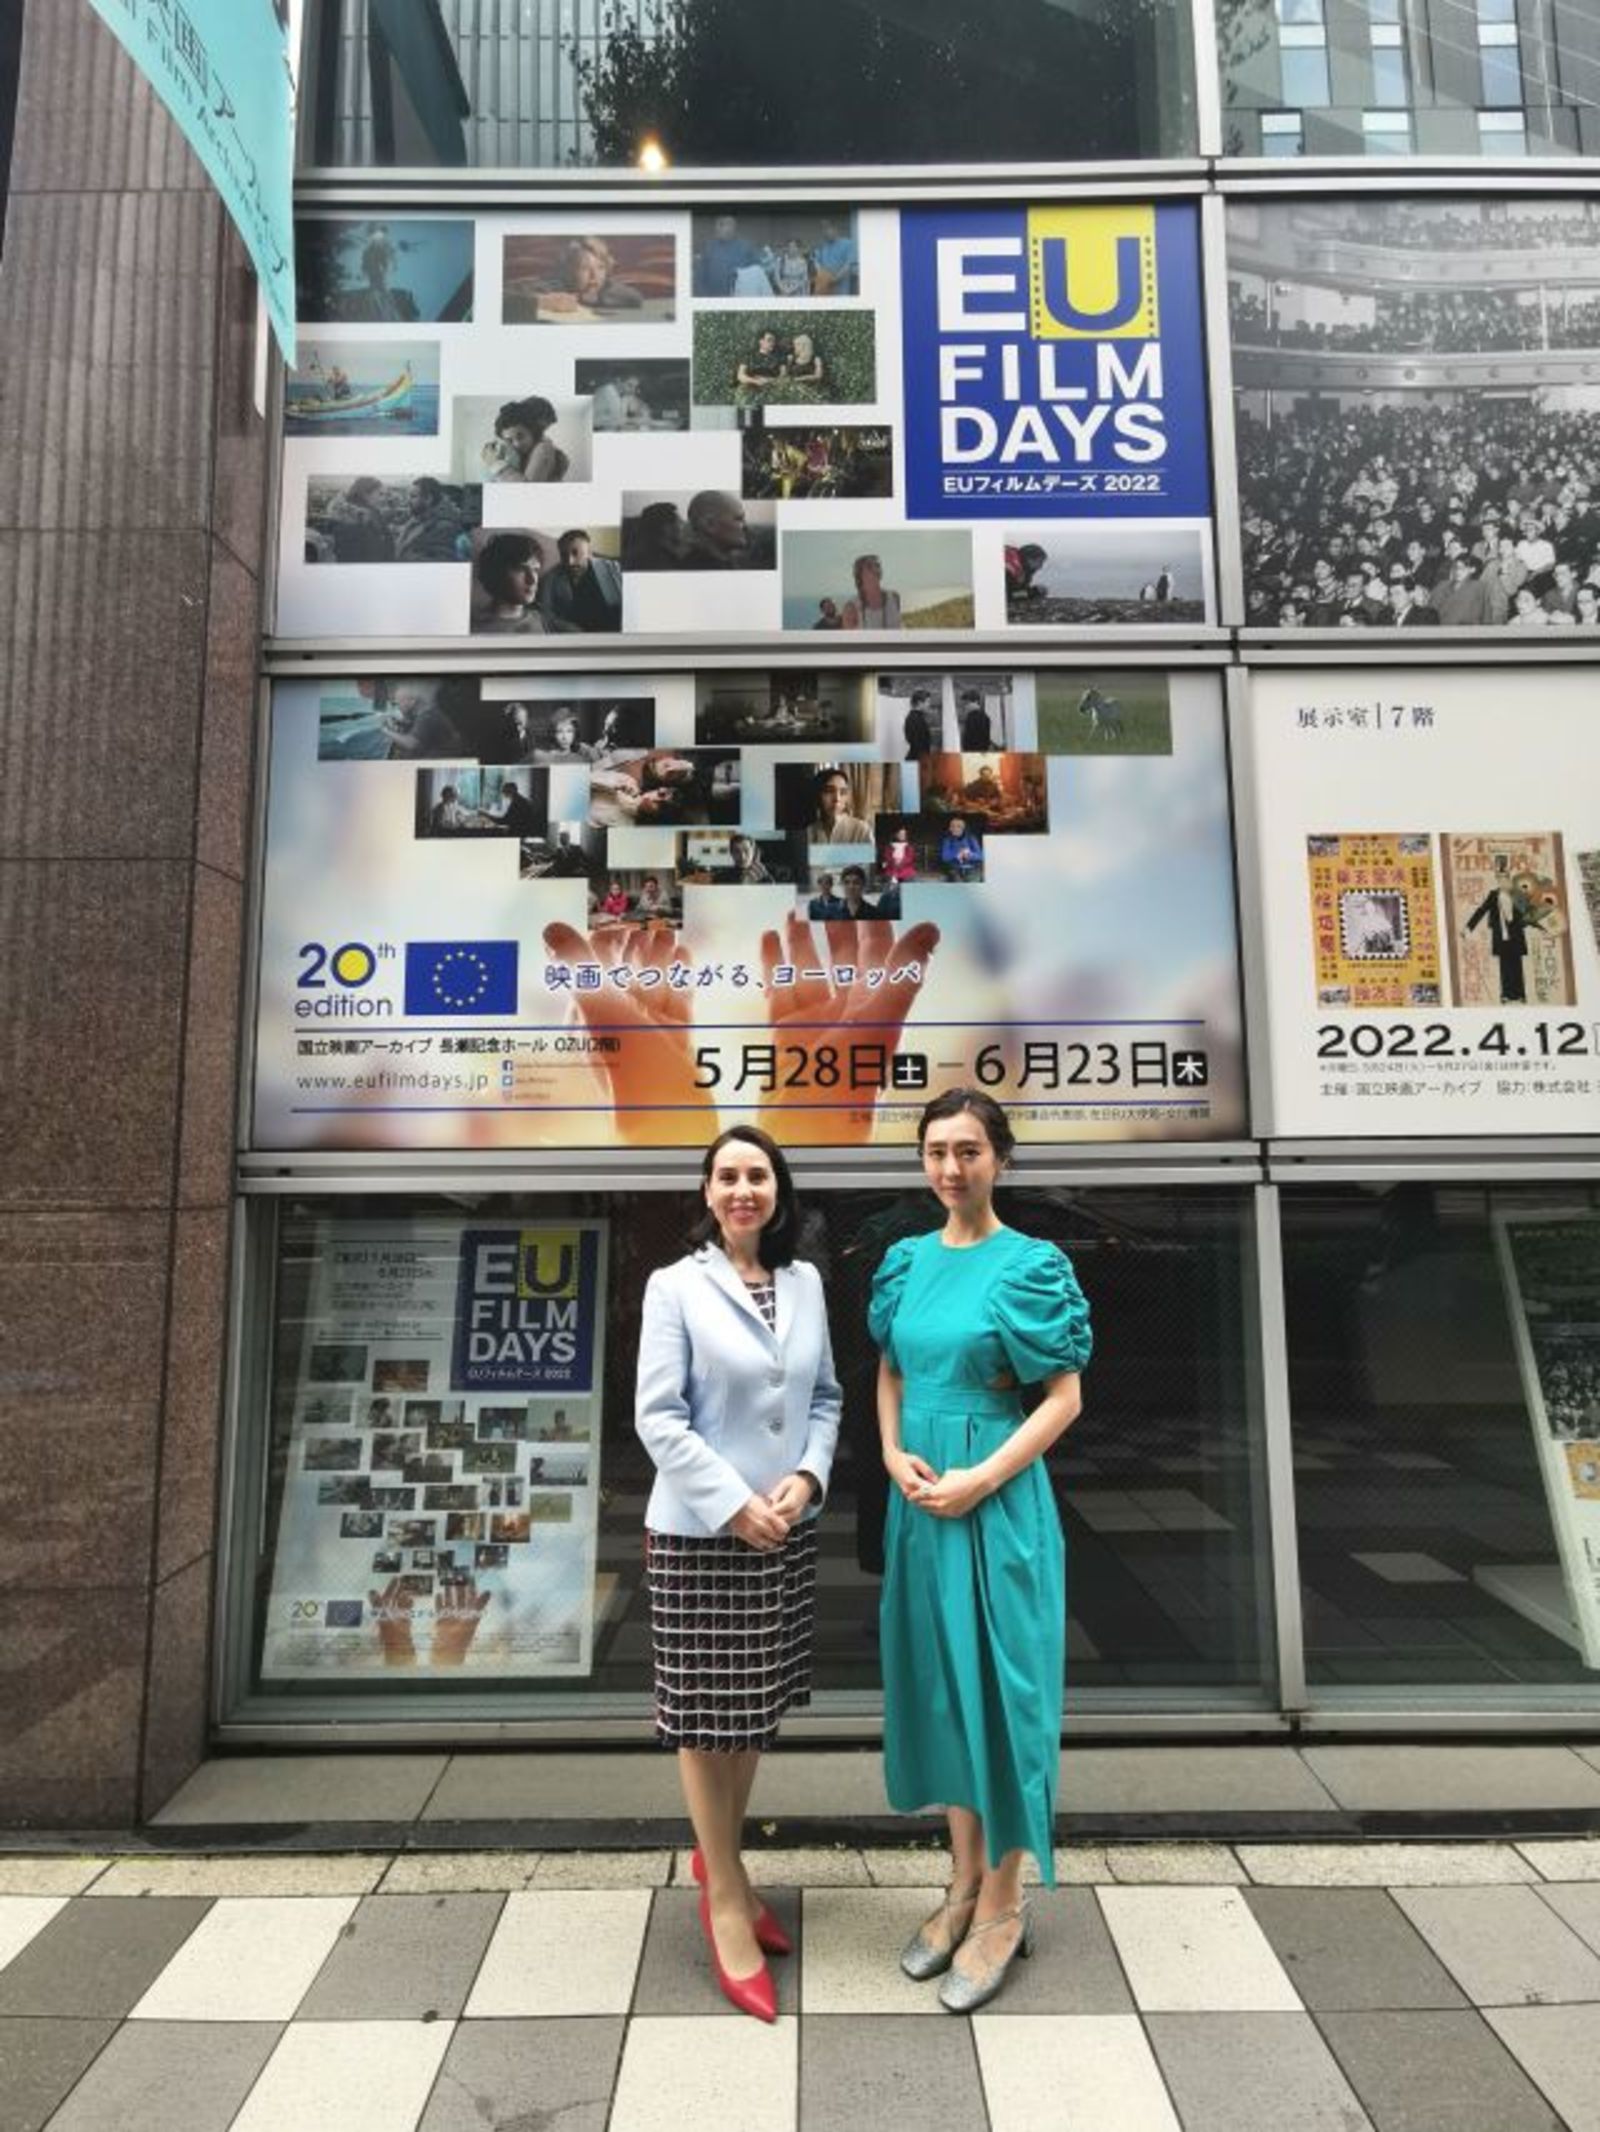 The Bulgarian-Japanese film “A Picture with Yuki” at the EU Film Days Festival in Japan